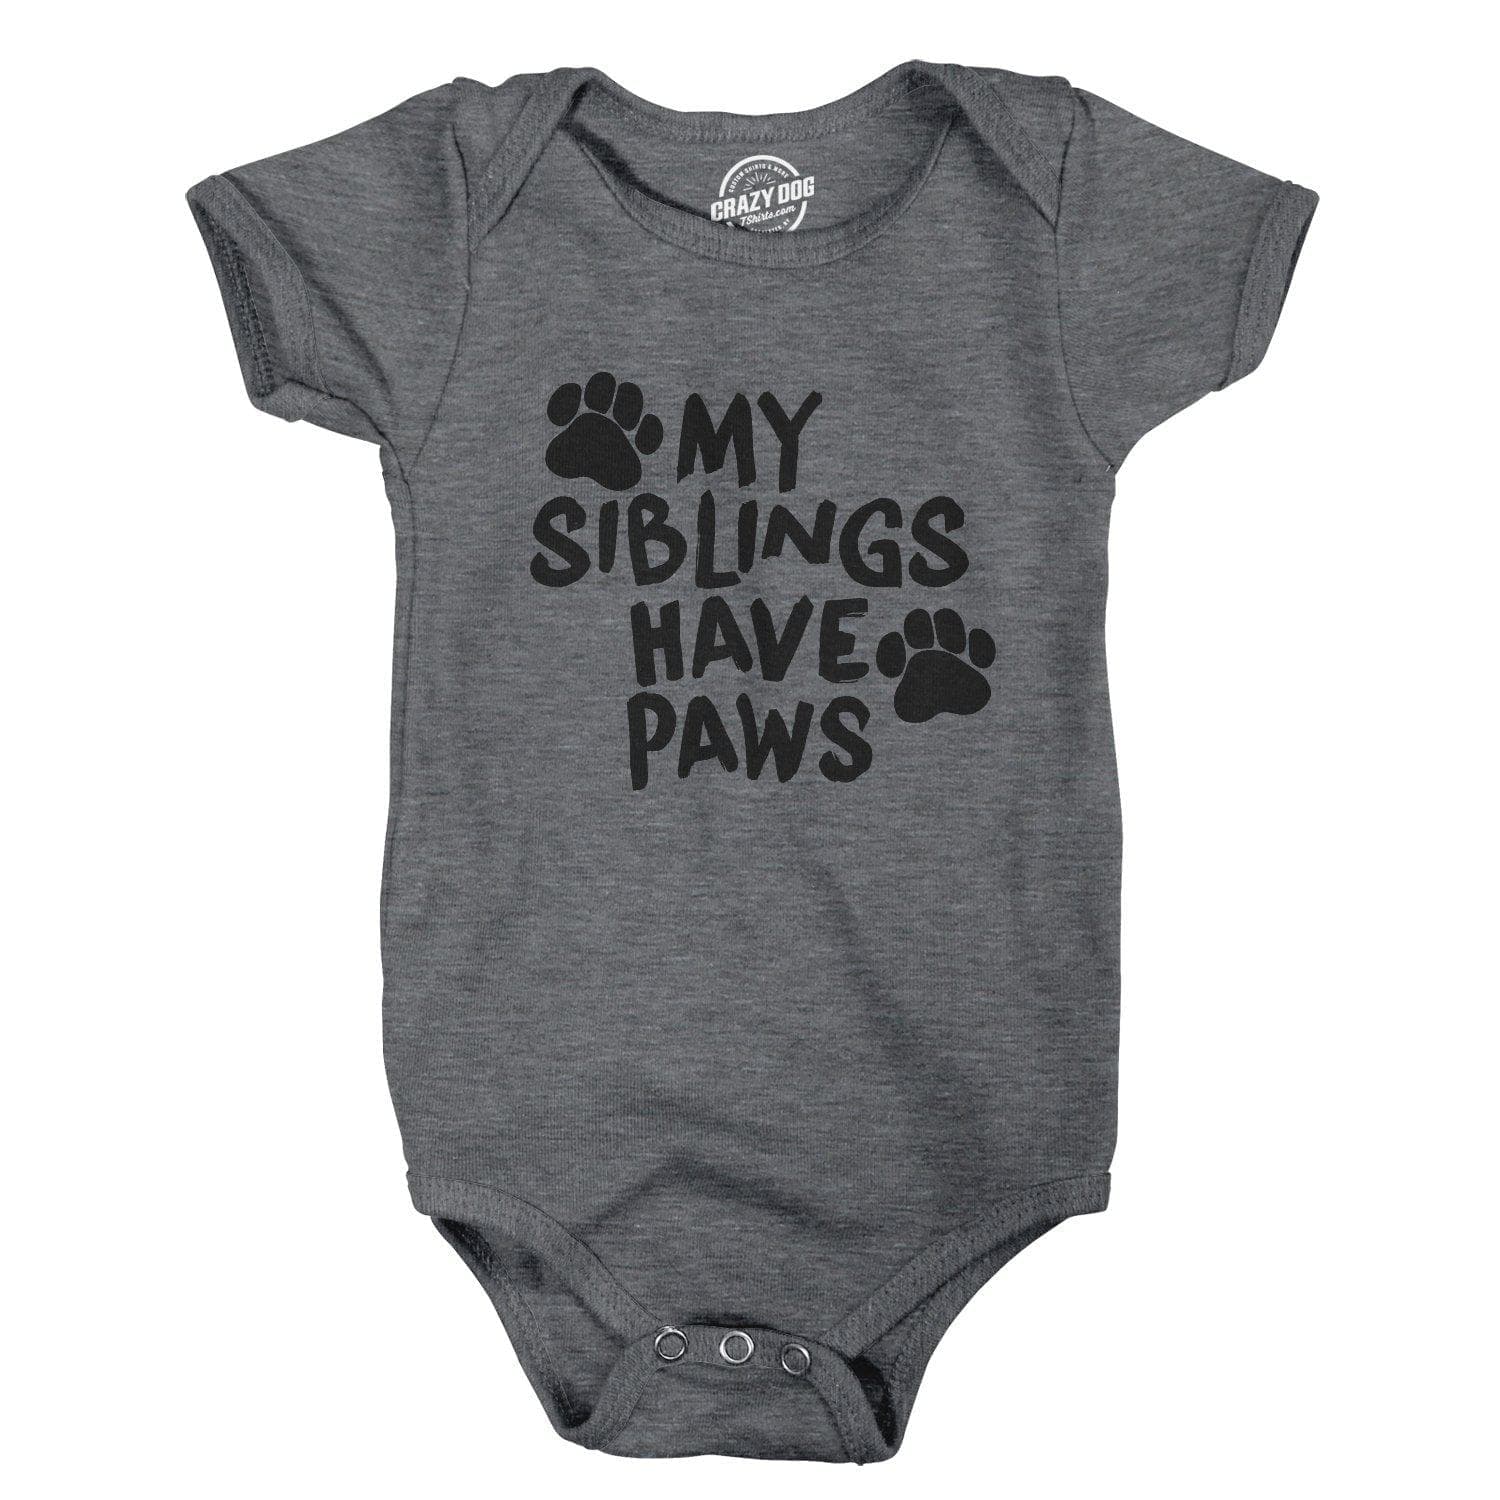 My Siblings Have Paws Baby Bodysuit - Crazy Dog T-Shirts